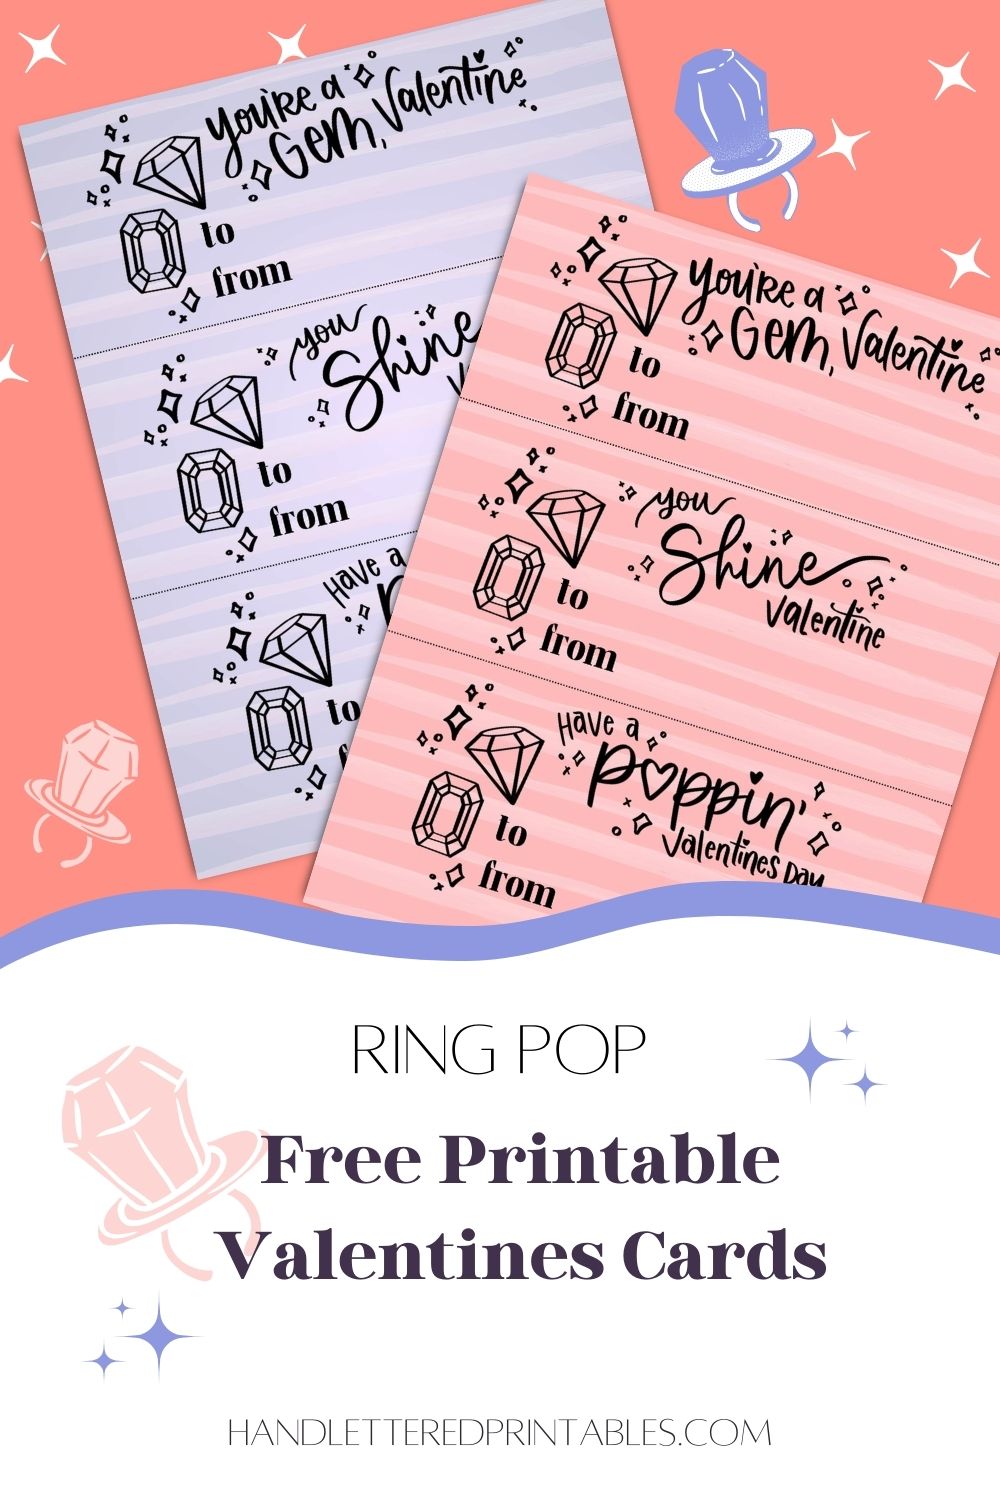 hand lettered valentines in both pink and purple read:' you're a gem, valentine', 'you shine, valentine', and 'have a poppin' valentine's day' image overlay reads ' ring pop free printable valentines cards' top image shows printables before they are cut from the full sheets